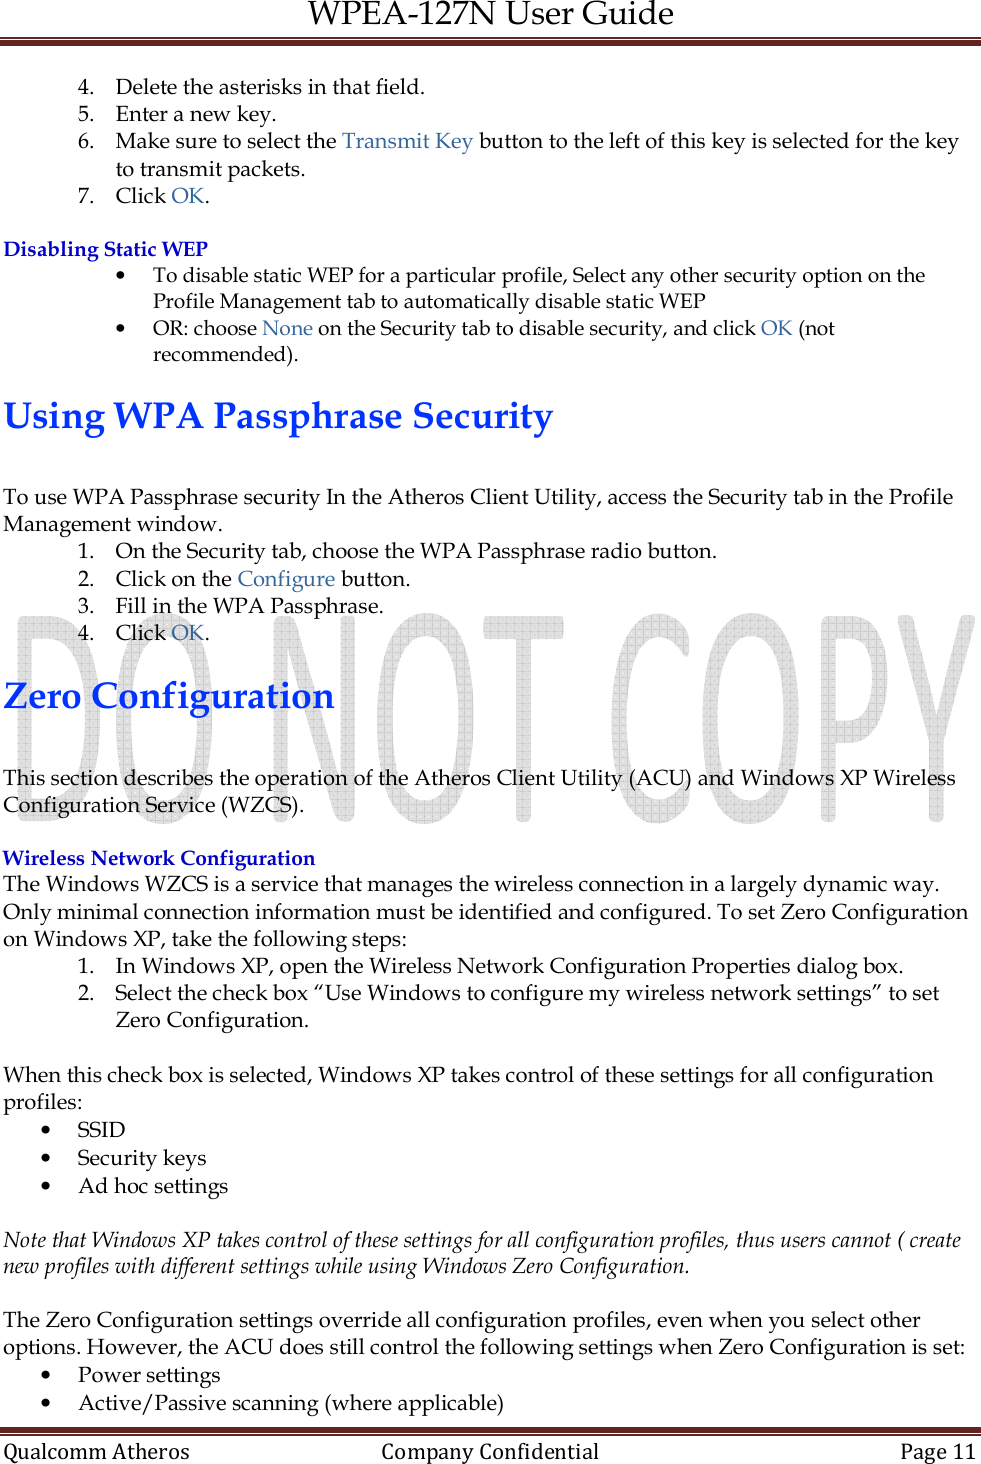 WPEA-127N User Guide  Qualcomm Atheros   Company Confidential  Page 11  4. Delete the asterisks in that field. 5. Enter a new key. 6. Make sure to select the Transmit Key button to the left of this key is selected for the key to transmit packets. 7. Click OK.  Disabling Static WEP • To disable static WEP for a particular profile, Select any other security option on the Profile Management tab to automatically disable static WEP • OR: choose None on the Security tab to disable security, and click OK (not recommended).  Using WPA Passphrase Security  To use WPA Passphrase security In the Atheros Client Utility, access the Security tab in the Profile Management window. 1. On the Security tab, choose the WPA Passphrase radio button. 2. Click on the Configure button. 3. Fill in the WPA Passphrase. 4. Click OK.  Zero Configuration  This section describes the operation of the Atheros Client Utility (ACU) and Windows XP Wireless Configuration Service (WZCS).  Wireless Network Configuration The Windows WZCS is a service that manages the wireless connection in a largely dynamic way. Only minimal connection information must be identified and configured. To set Zero Configuration on Windows XP, take the following steps: 1. In Windows XP, open the Wireless Network Configuration Properties dialog box. 2. Select the check box “Use Windows to configure my wireless network settings” to set Zero Configuration.  When this check box is selected, Windows XP takes control of these settings for all configuration profiles: • SSID • Security keys • Ad hoc settings  Note that Windows XP takes control of these settings for all configuration profiles, thus users cannot ( create new profiles with different settings while using Windows Zero Configuration.  The Zero Configuration settings override all configuration profiles, even when you select other options. However, the ACU does still control the following settings when Zero Configuration is set: • Power settings • Active/Passive scanning (where applicable) 